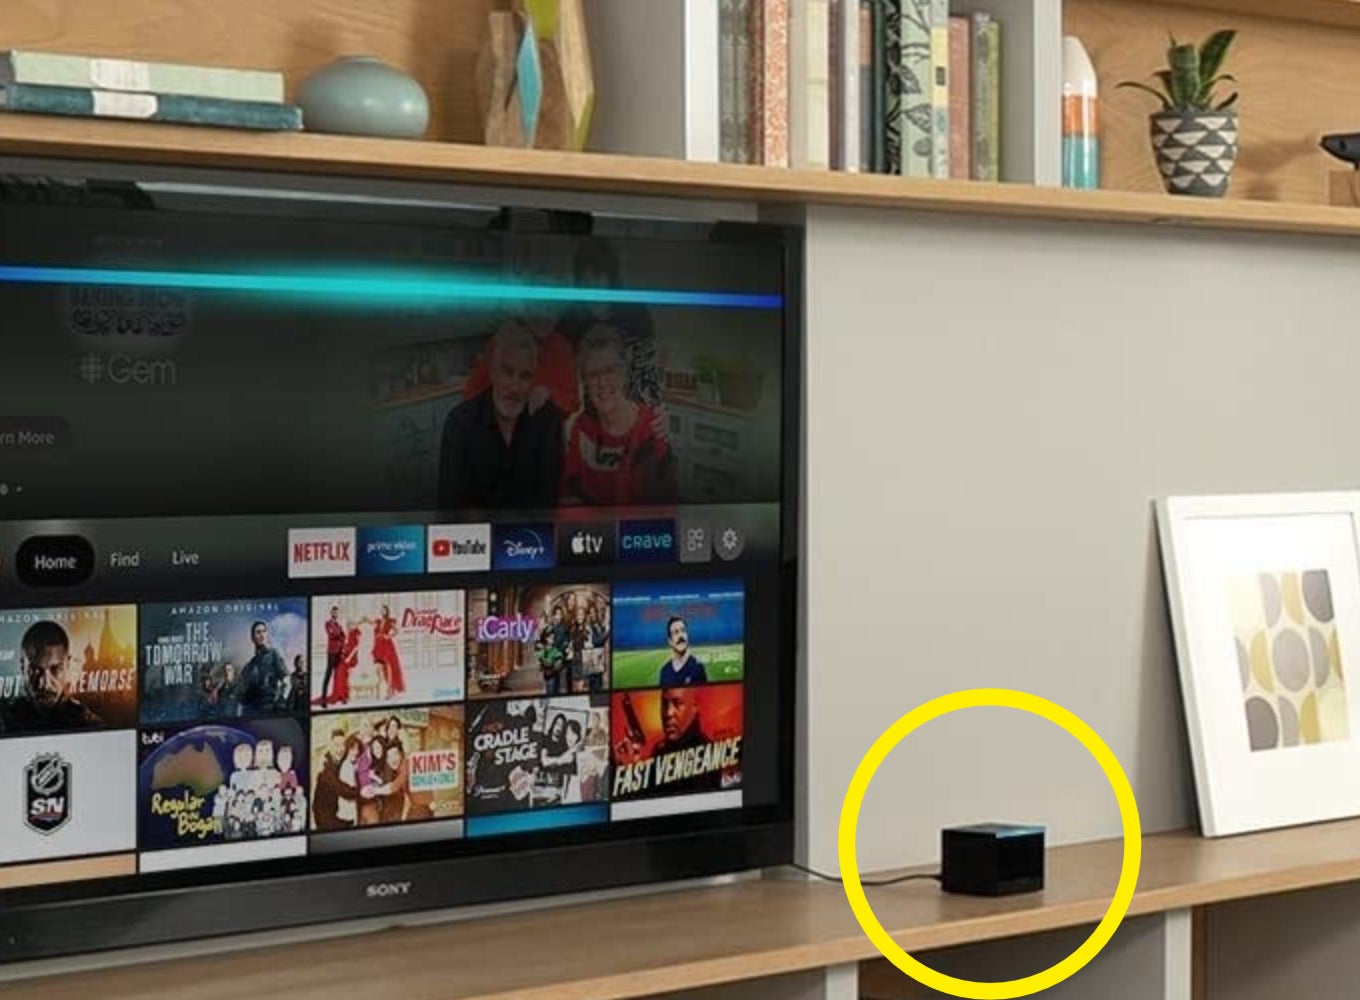 the cube on a TV stand next to the TV